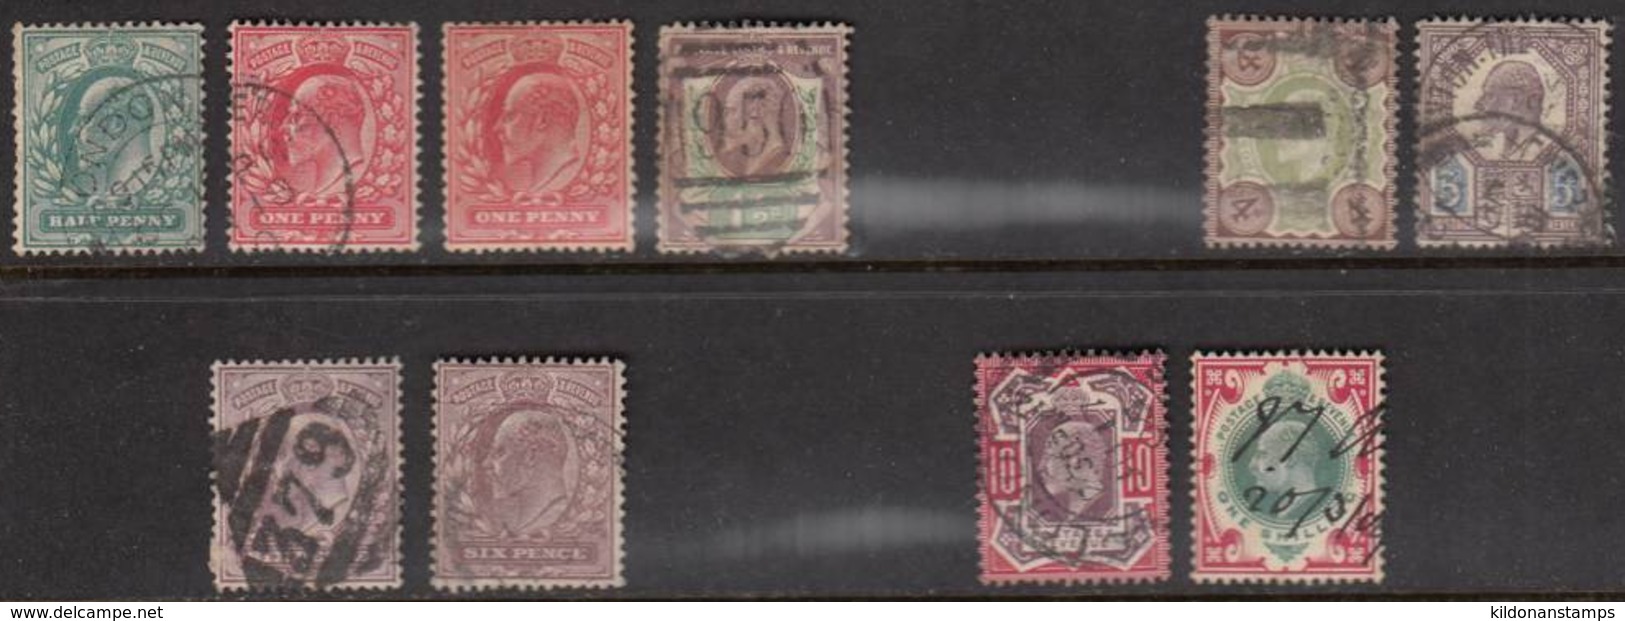 Great Britain 1902 Mint Mounted/cancelled, See Notes, Sc# 127-129,133-134,135a,135b,137a,140 (incl 128a) - Gebraucht